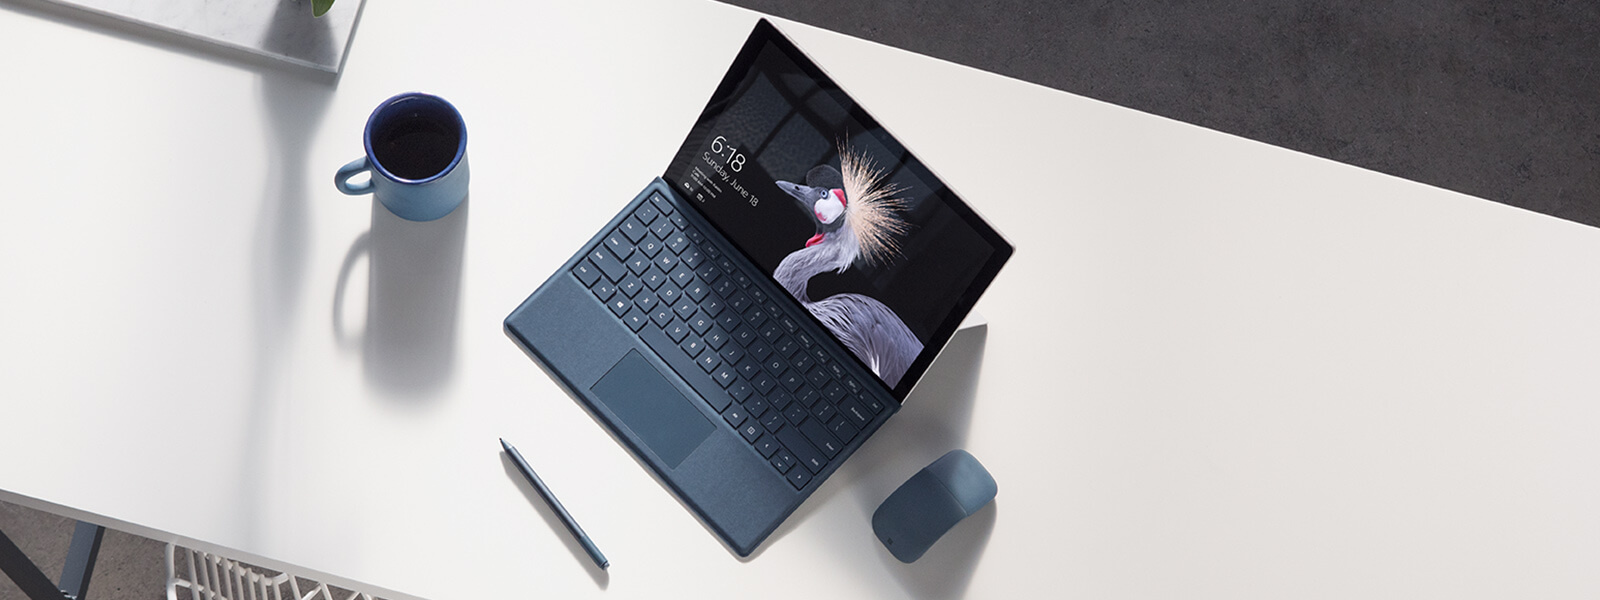 Microsoft reportedly launching a low-cost Surface to compete with iPad